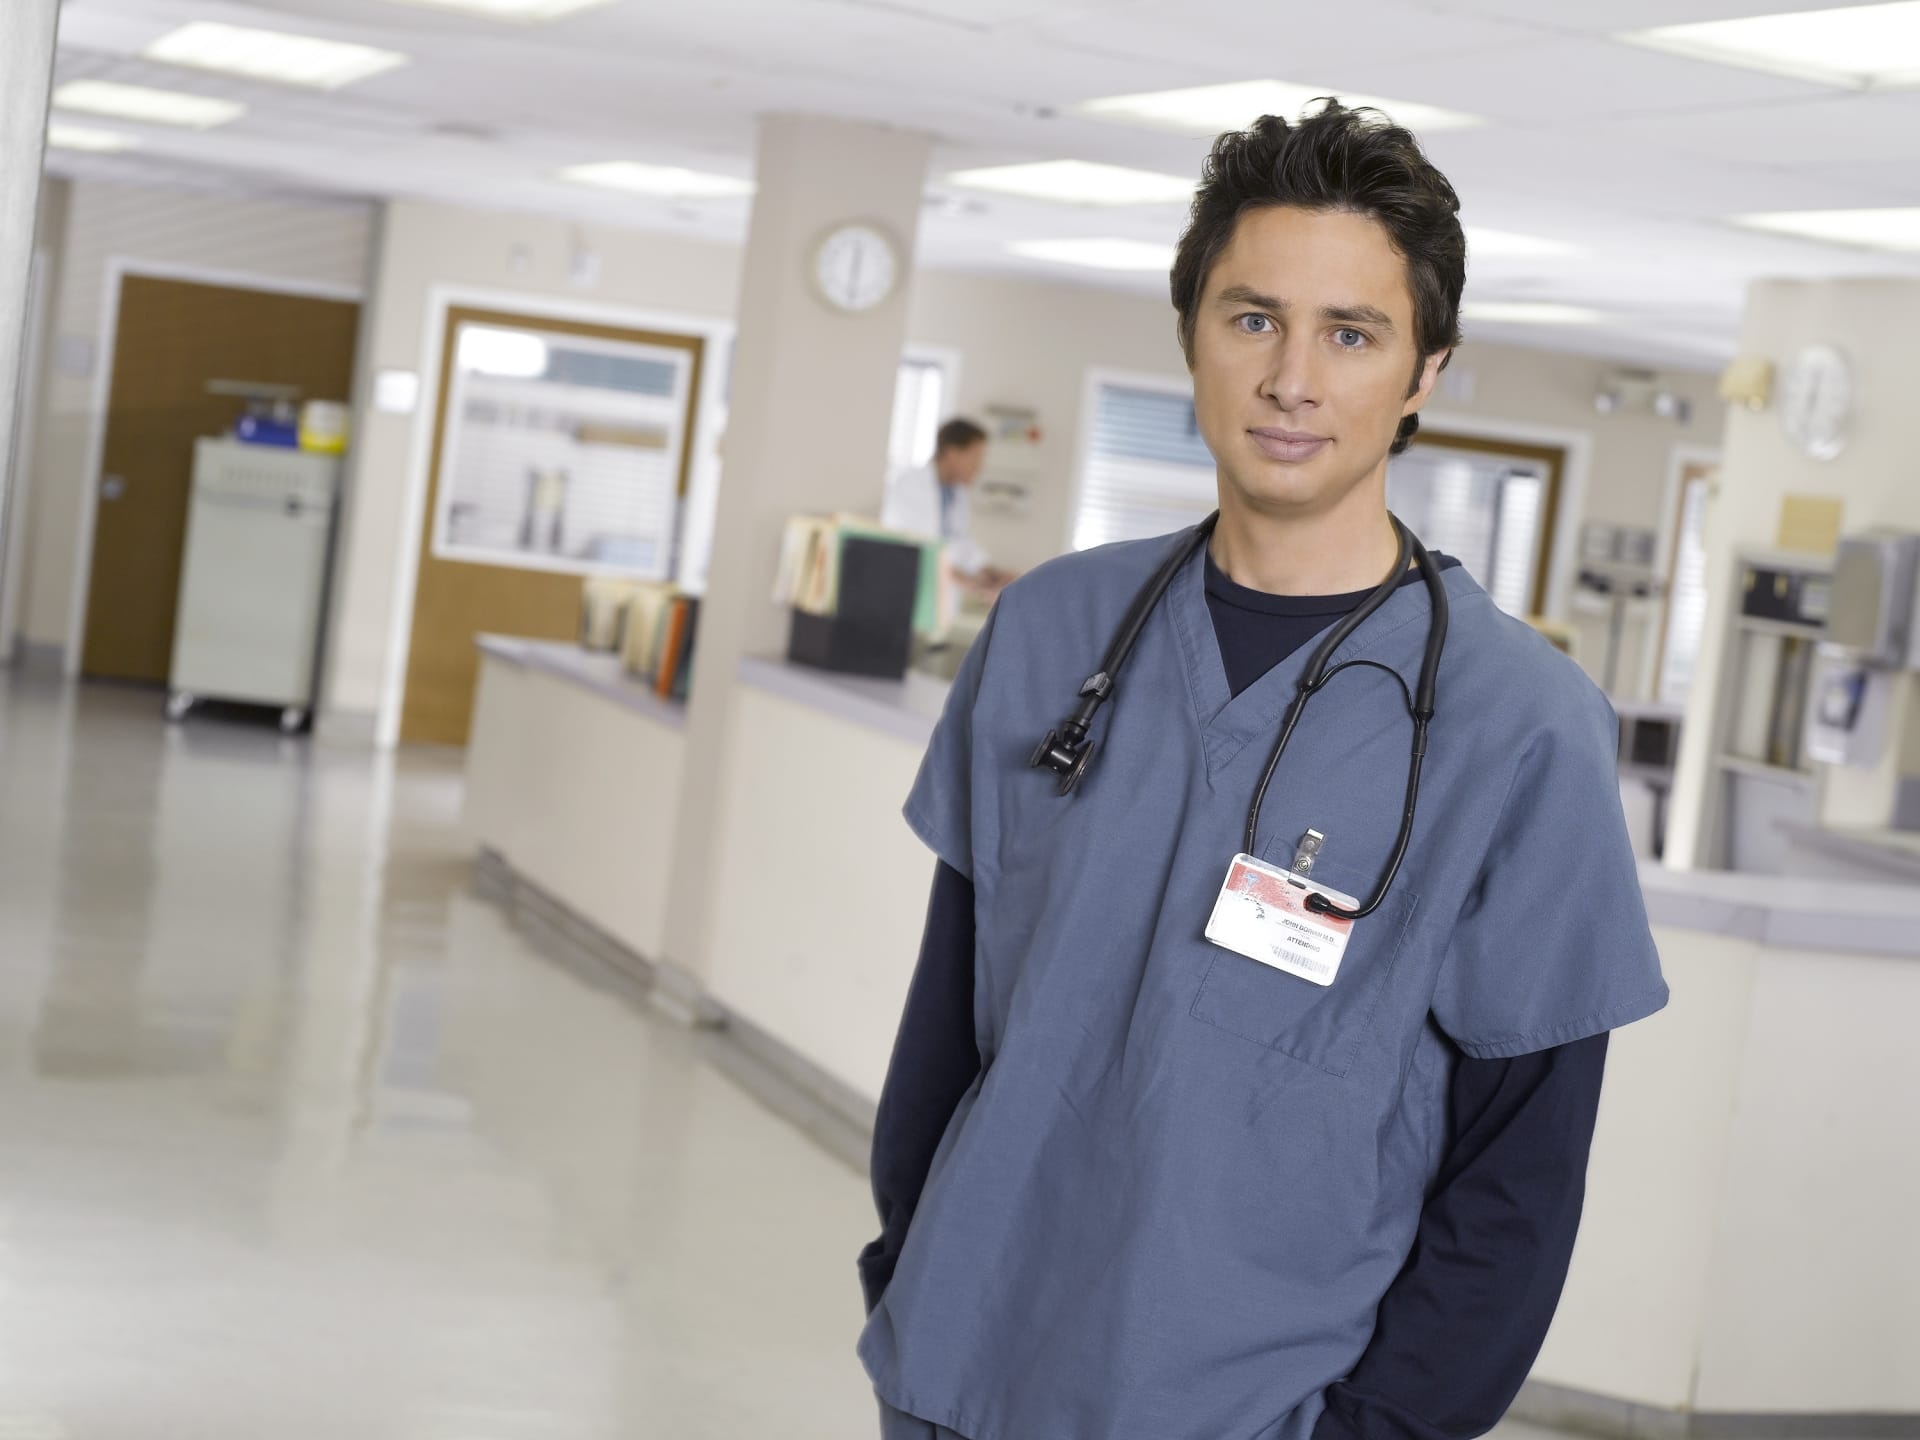 Scrubs (TV Series): Three consecutive Golden Globe Award for Best Actor – Television Series Musical or Comedy for Zach Braff. 1920x1440 HD Wallpaper.